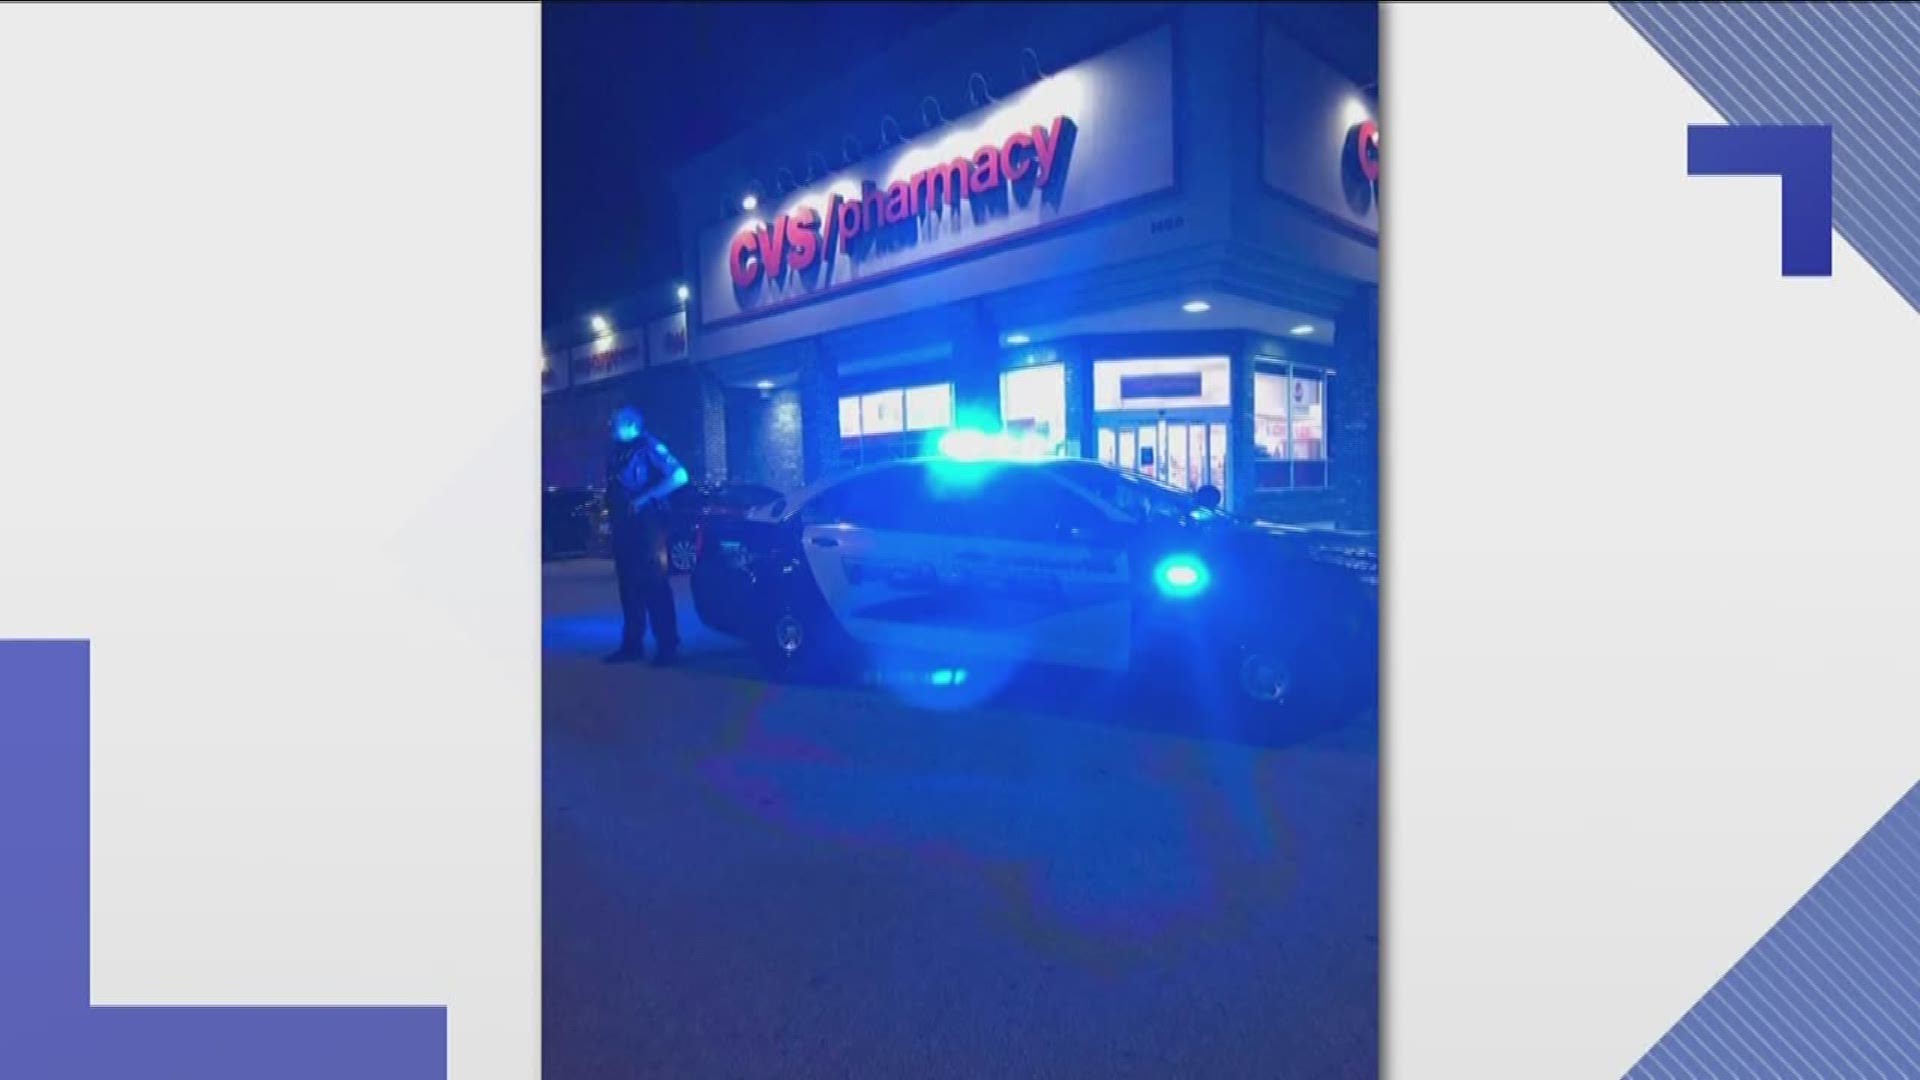 The Gainesville Times reports that Jack Hough was shot and killed in a CVS store parking lot.